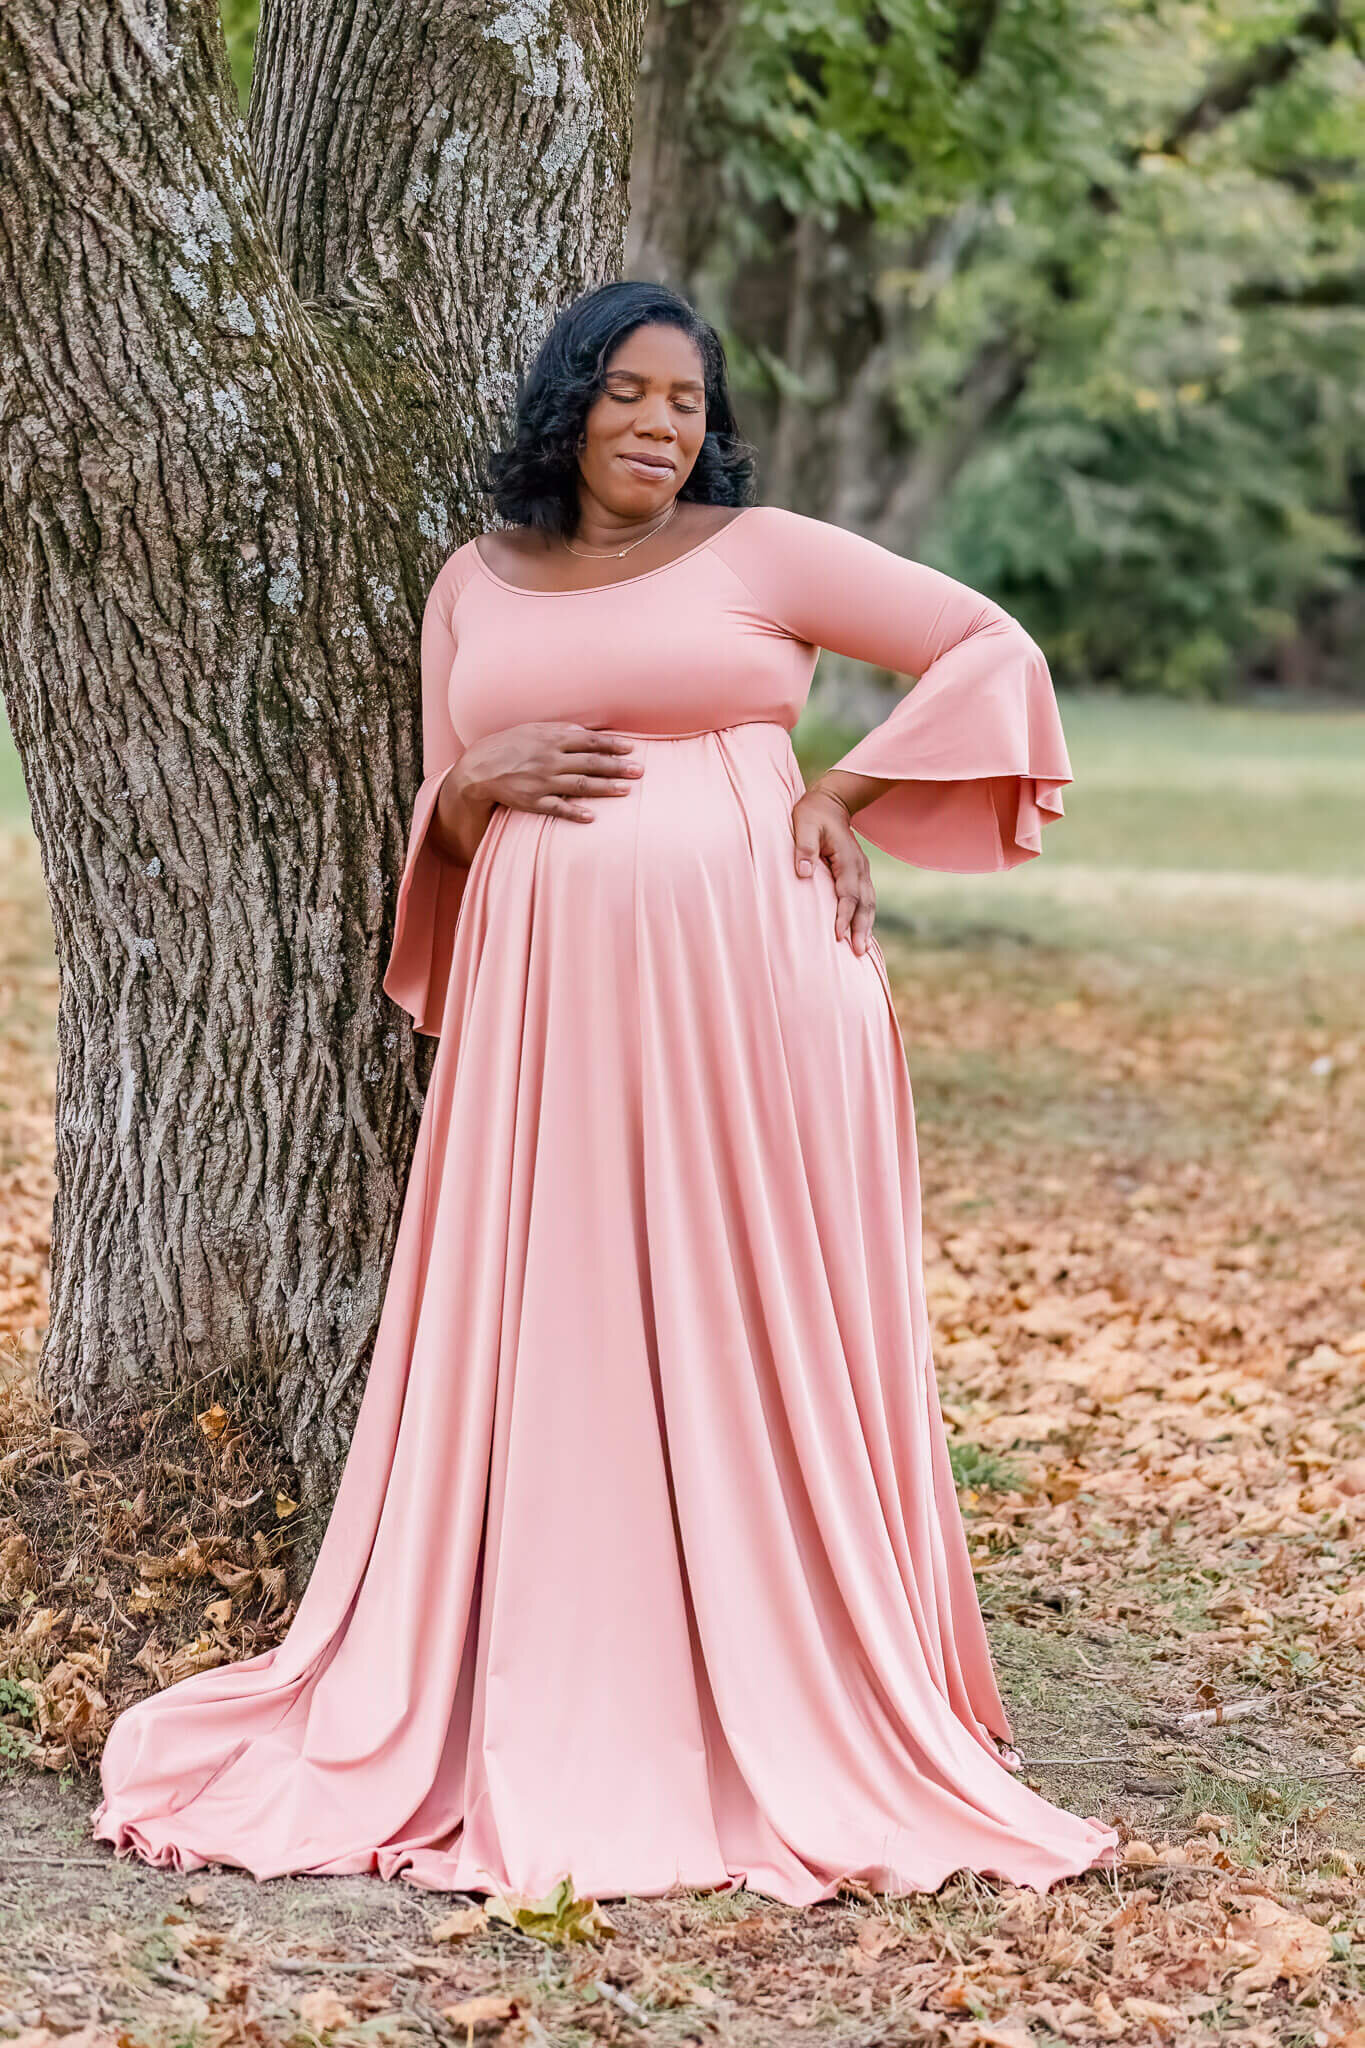 A pregnant woman embracing her belly and leaning against a tree at a park.